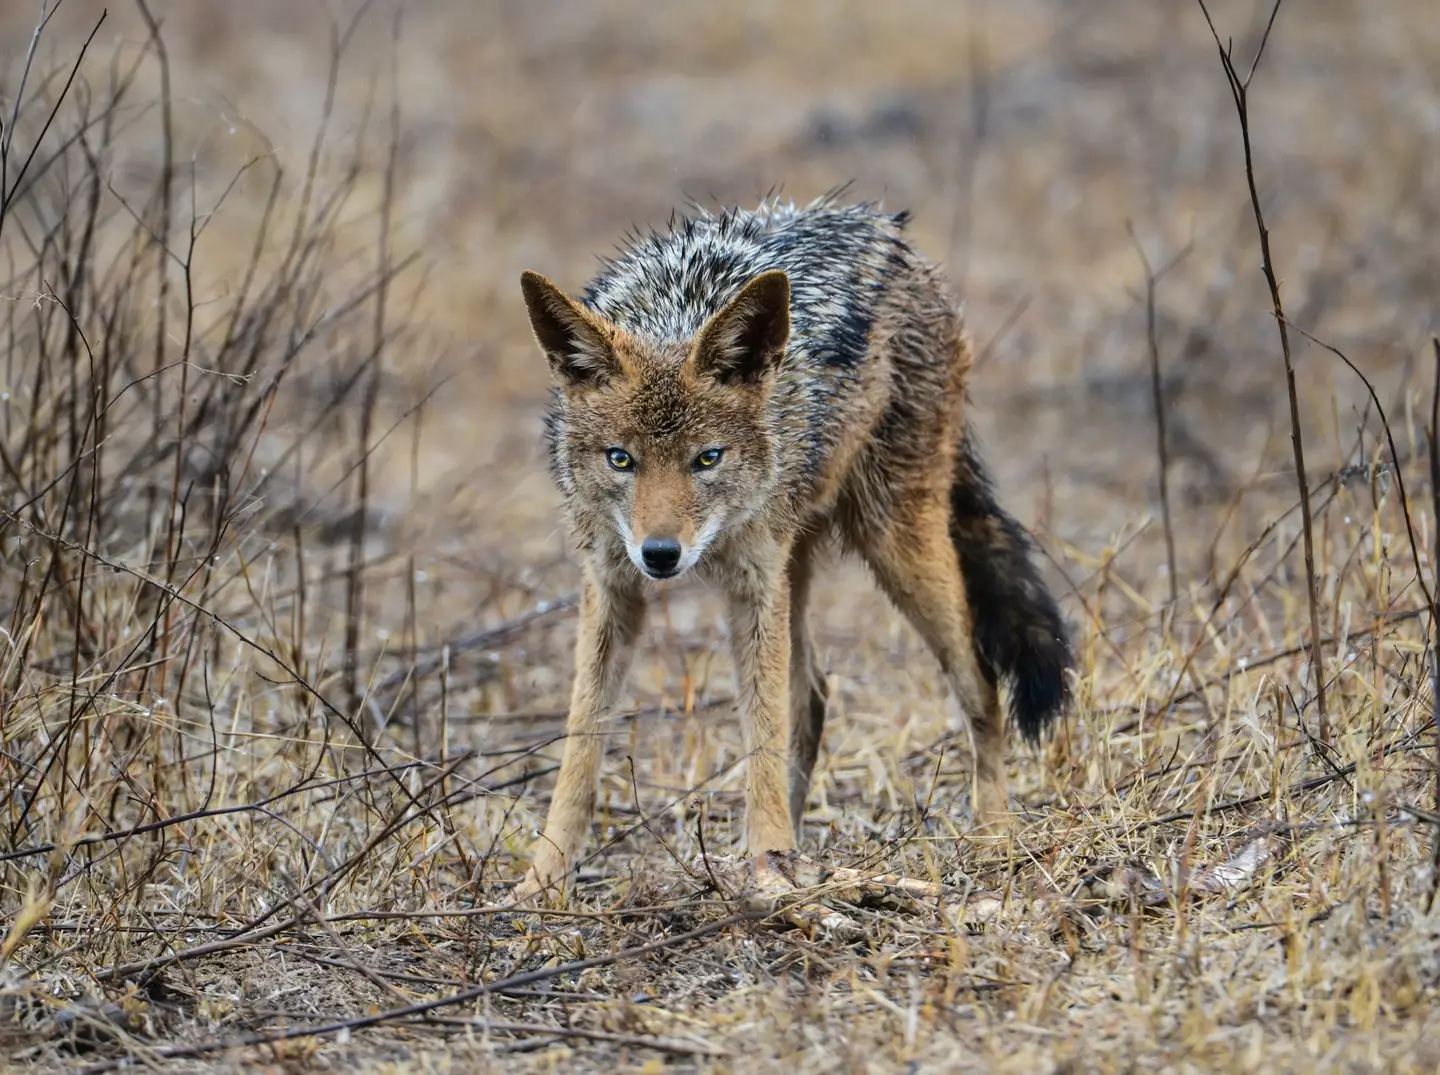 Coyote attacks in the US are fortunately very rare.